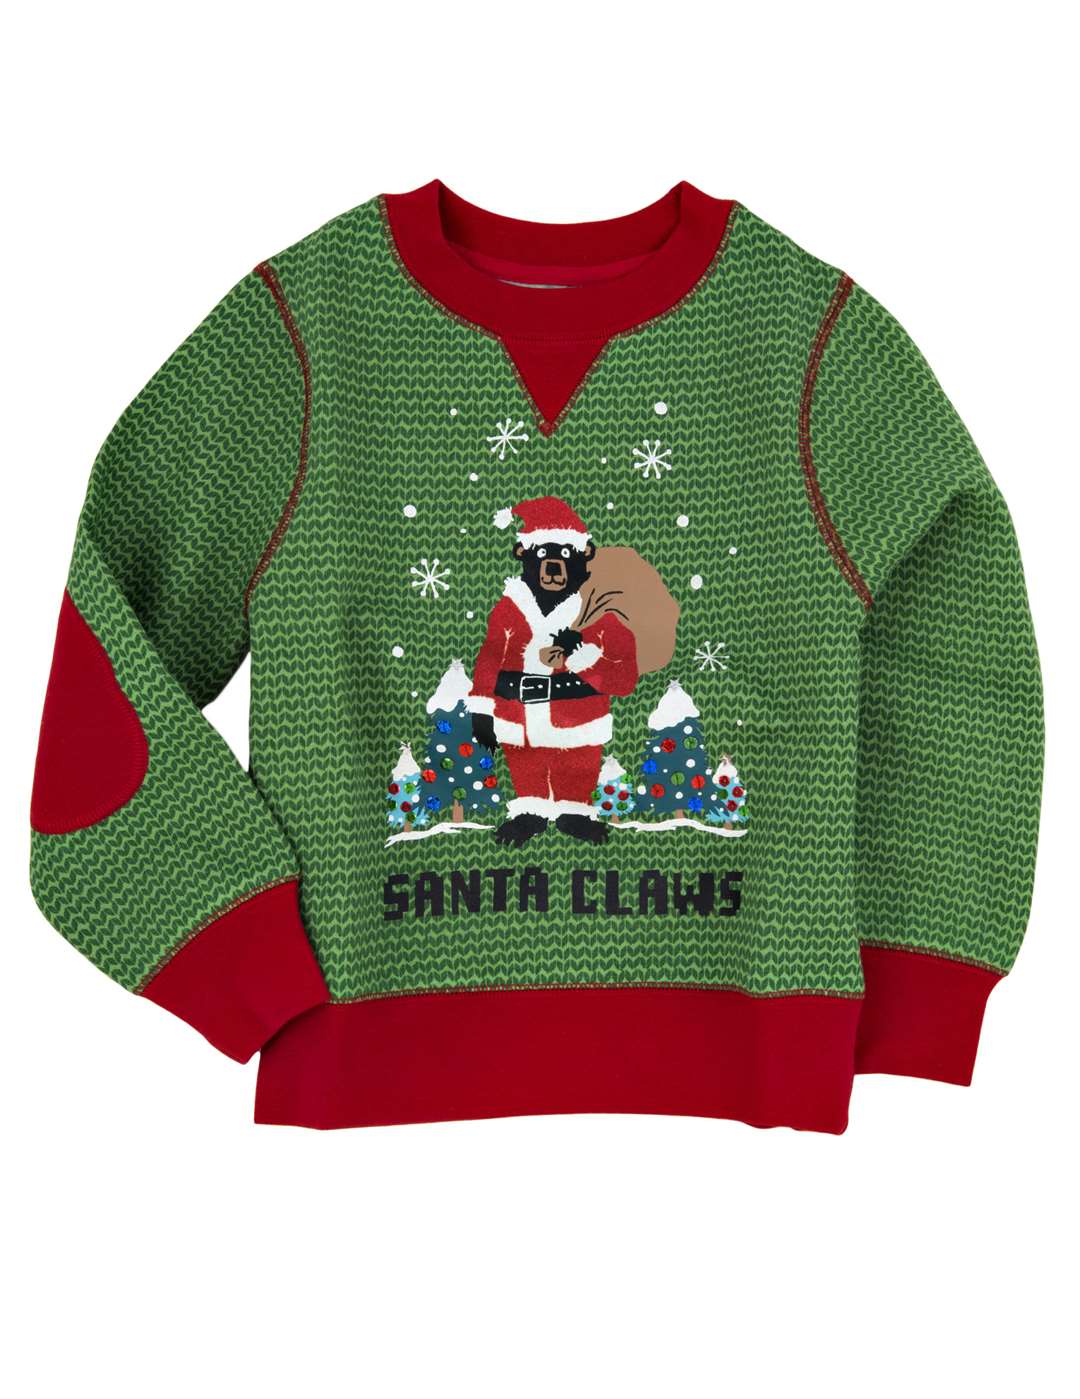 Santa Claws Kids Ugly Christmas sweater: This brushed fleece bear Santa print jumper has a contrast trim, and is machine washable. Available in sizes two and three years, £21.33 at www.amazon.co.uk